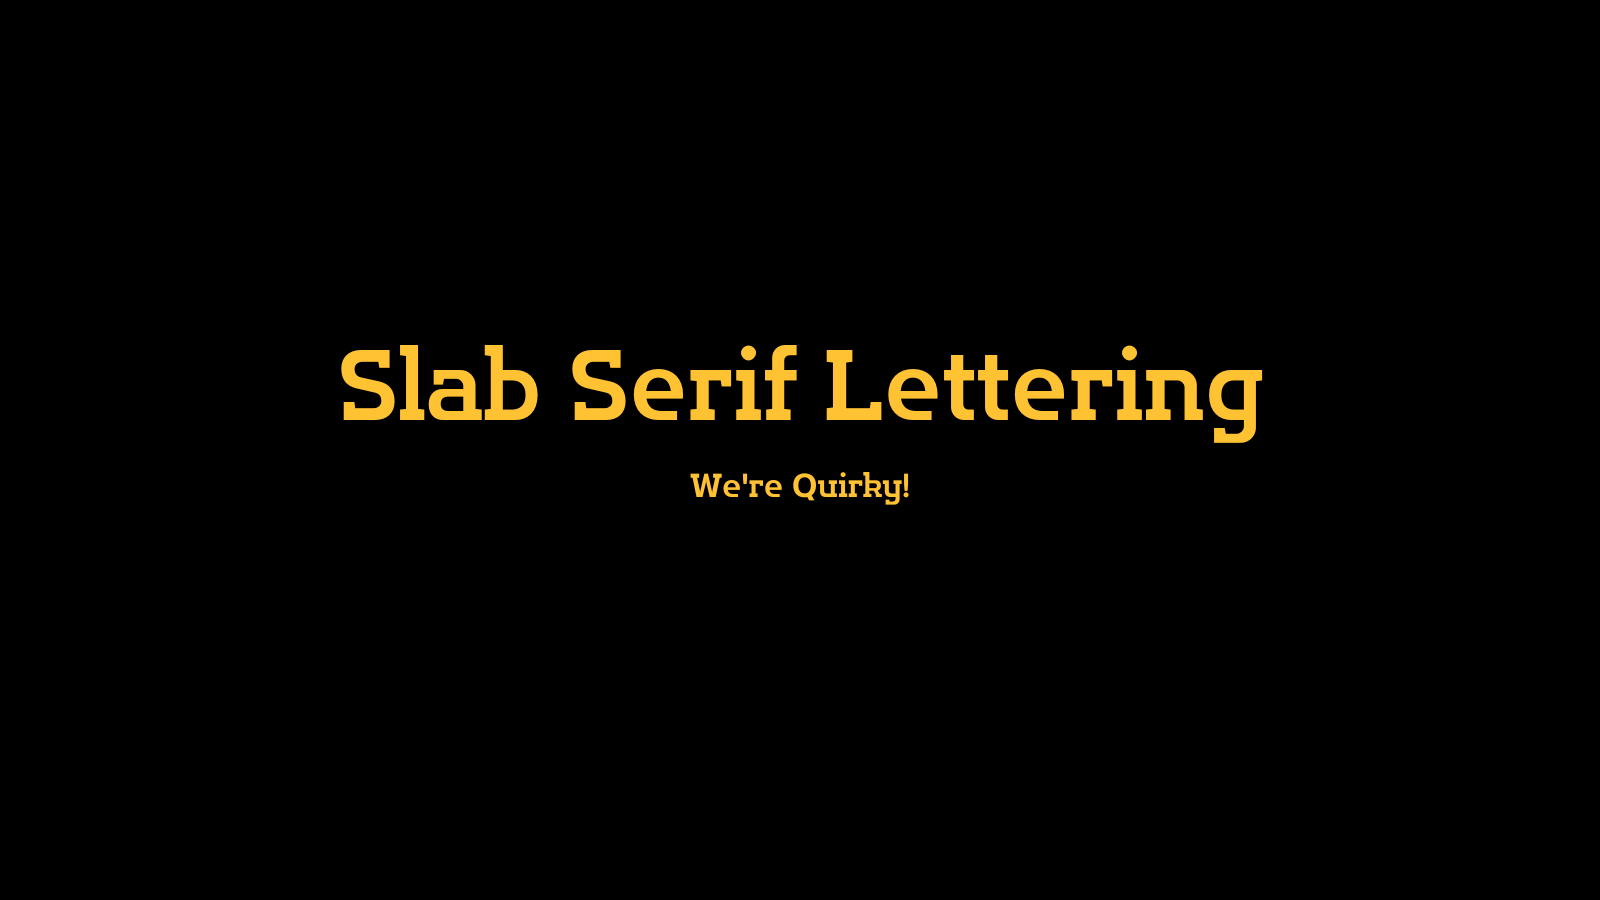 "Slab Serif Lettering: We're quirky!" in a slab serif font